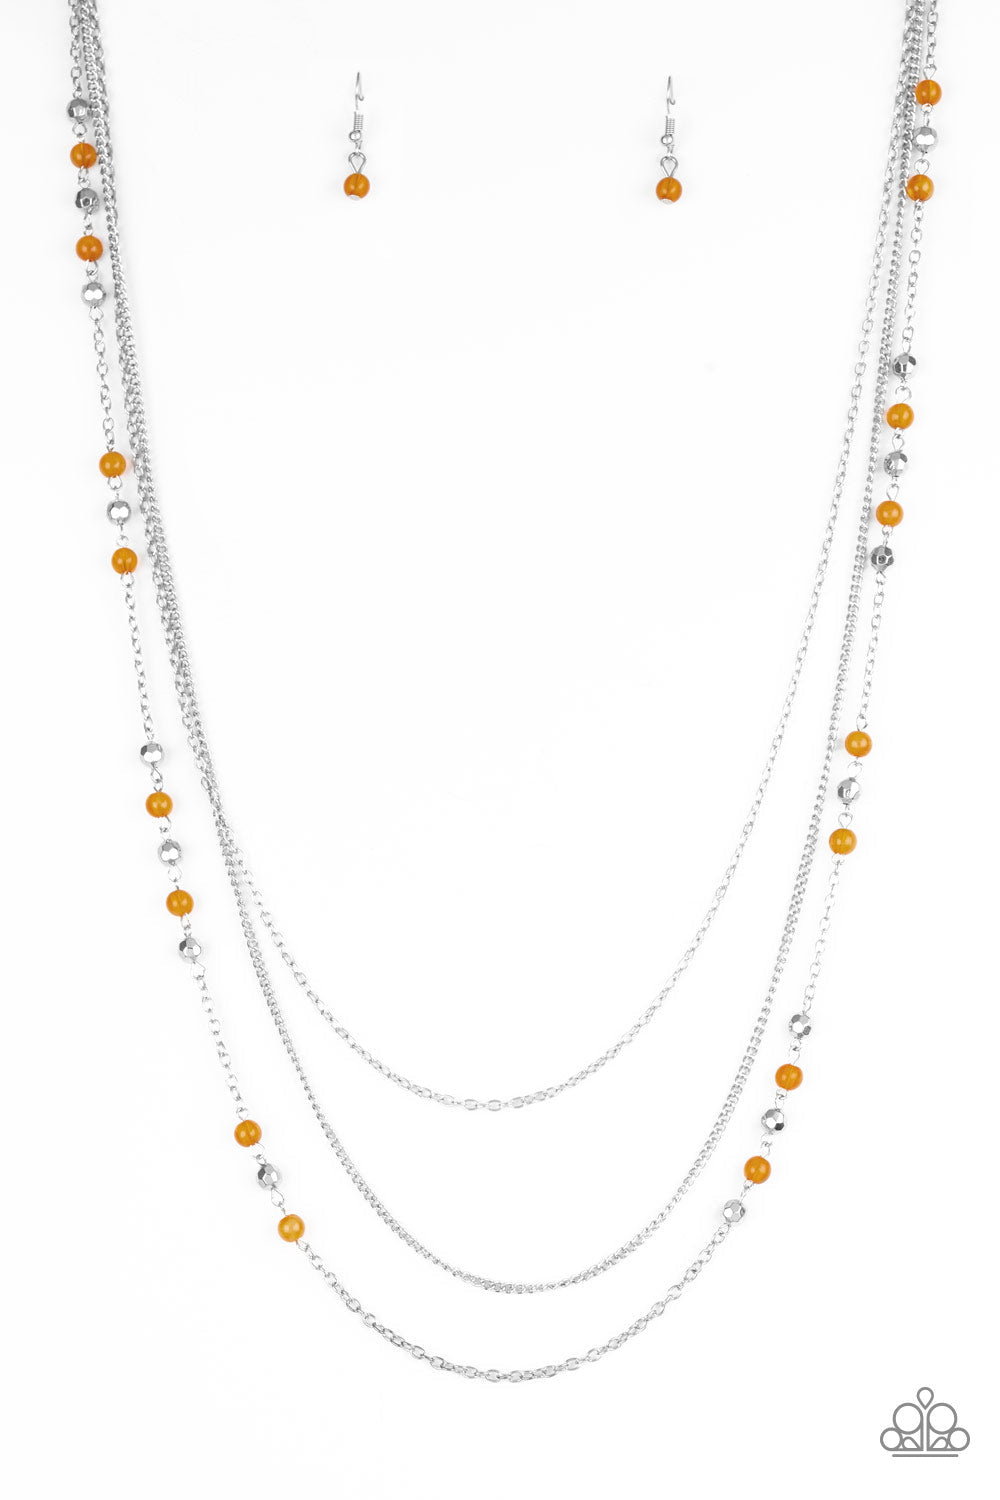 Colorful Cadence - Orange and Silver Necklace - Paparazzi Accessories - Faceted silver and glassy orange beads trickle along shimmery silver chains down the chest for a whimsical style necklace.